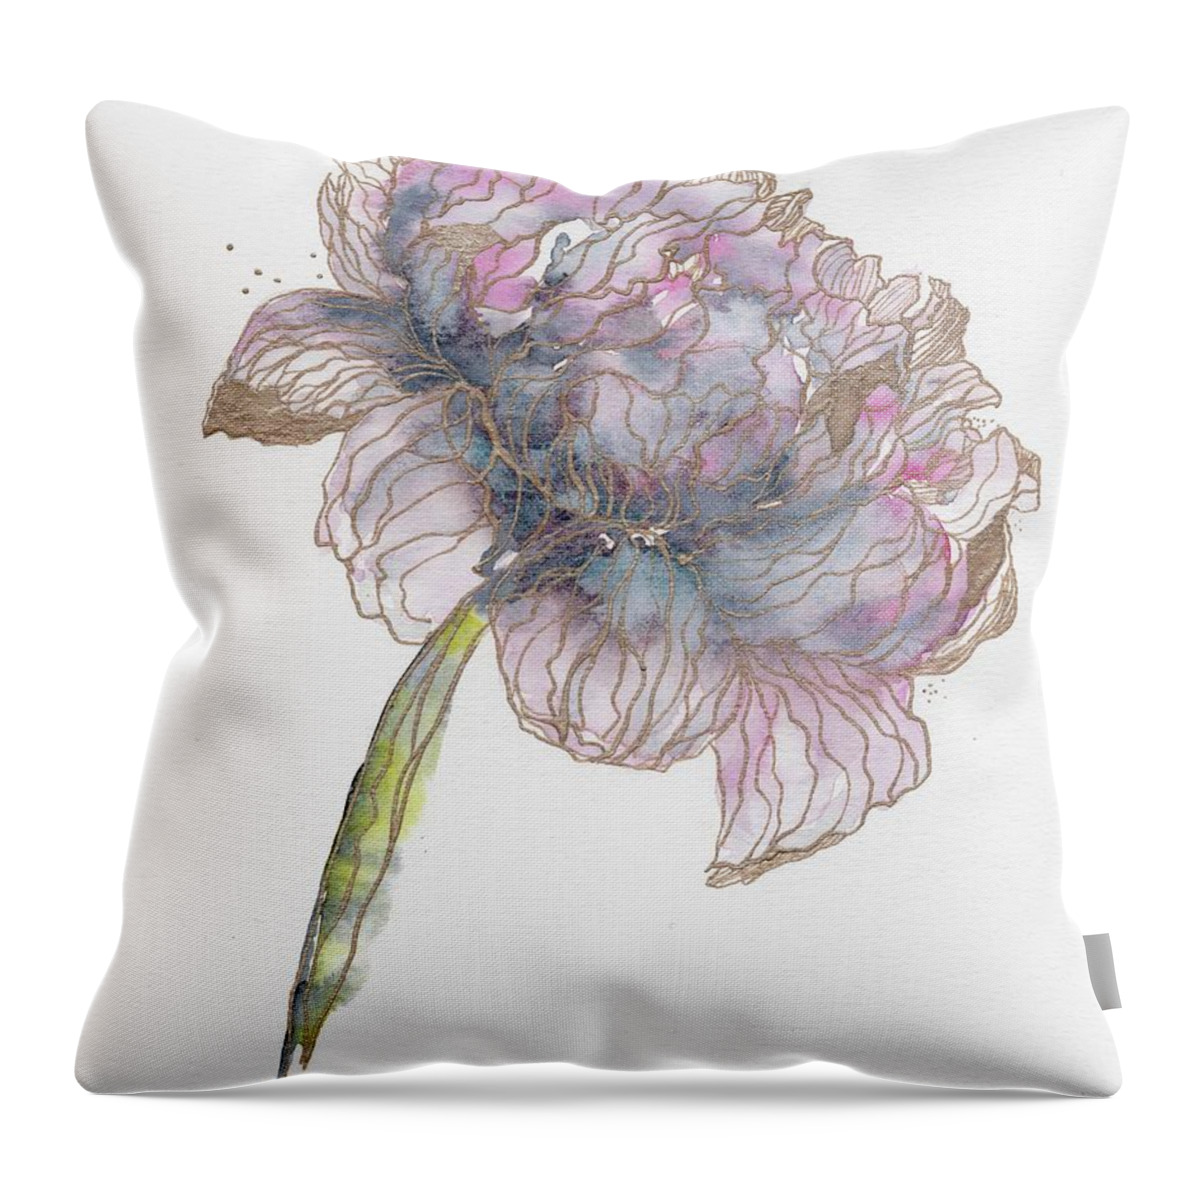 Watercolor Throw Pillow featuring the painting Peony by Kelly Edwards